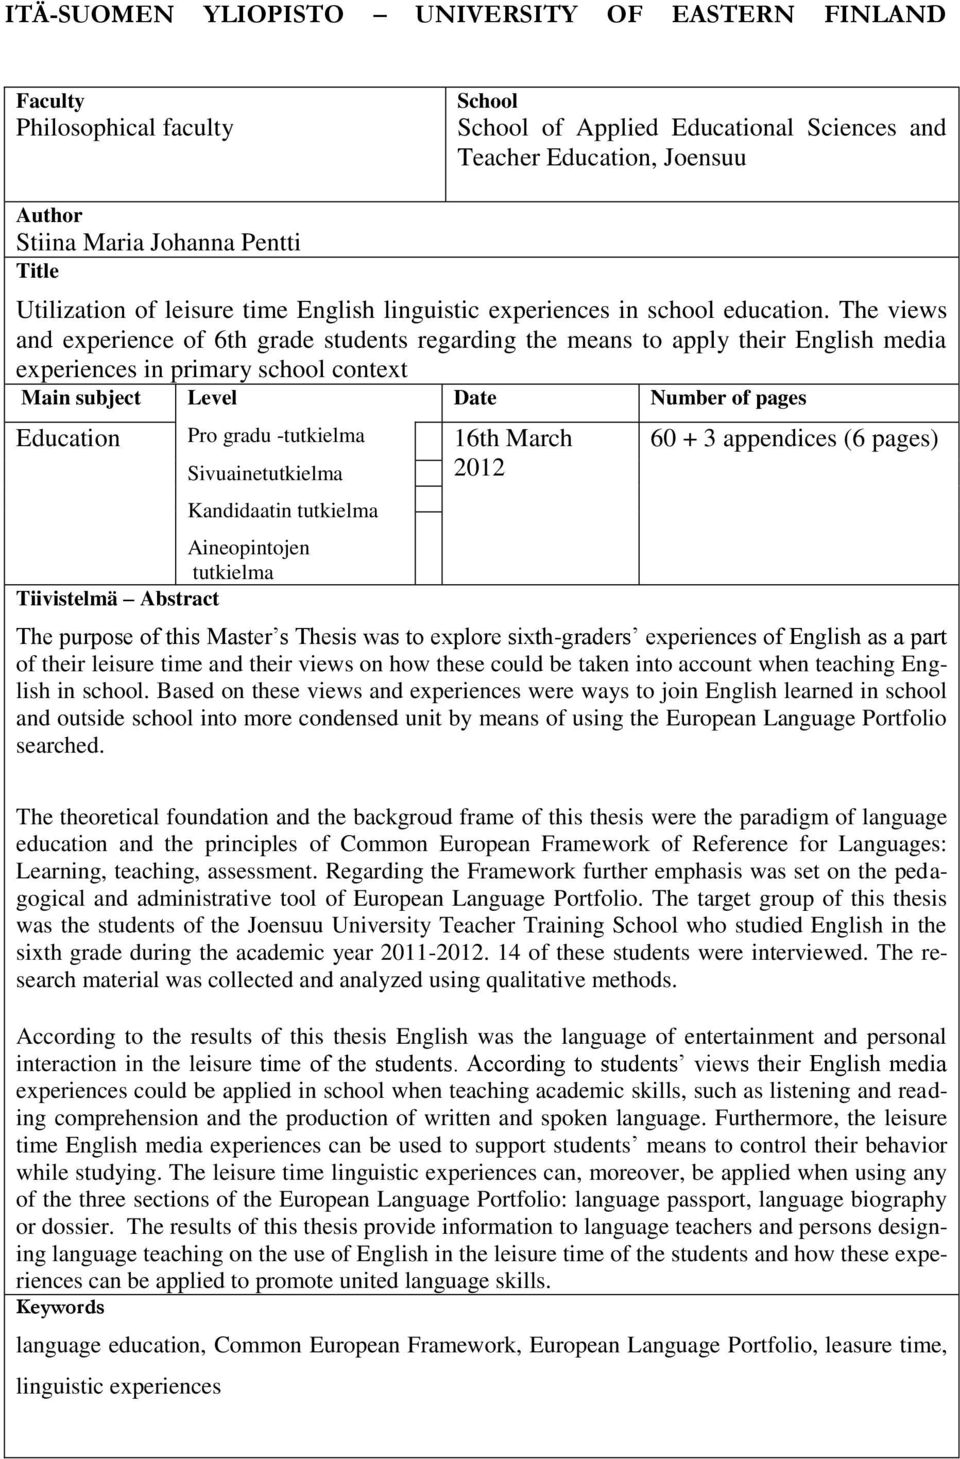 The views and experience of 6th grade students regarding the means to apply their English media experiences in primary school context Main subject Level Date Number of pages Education Pro gradu